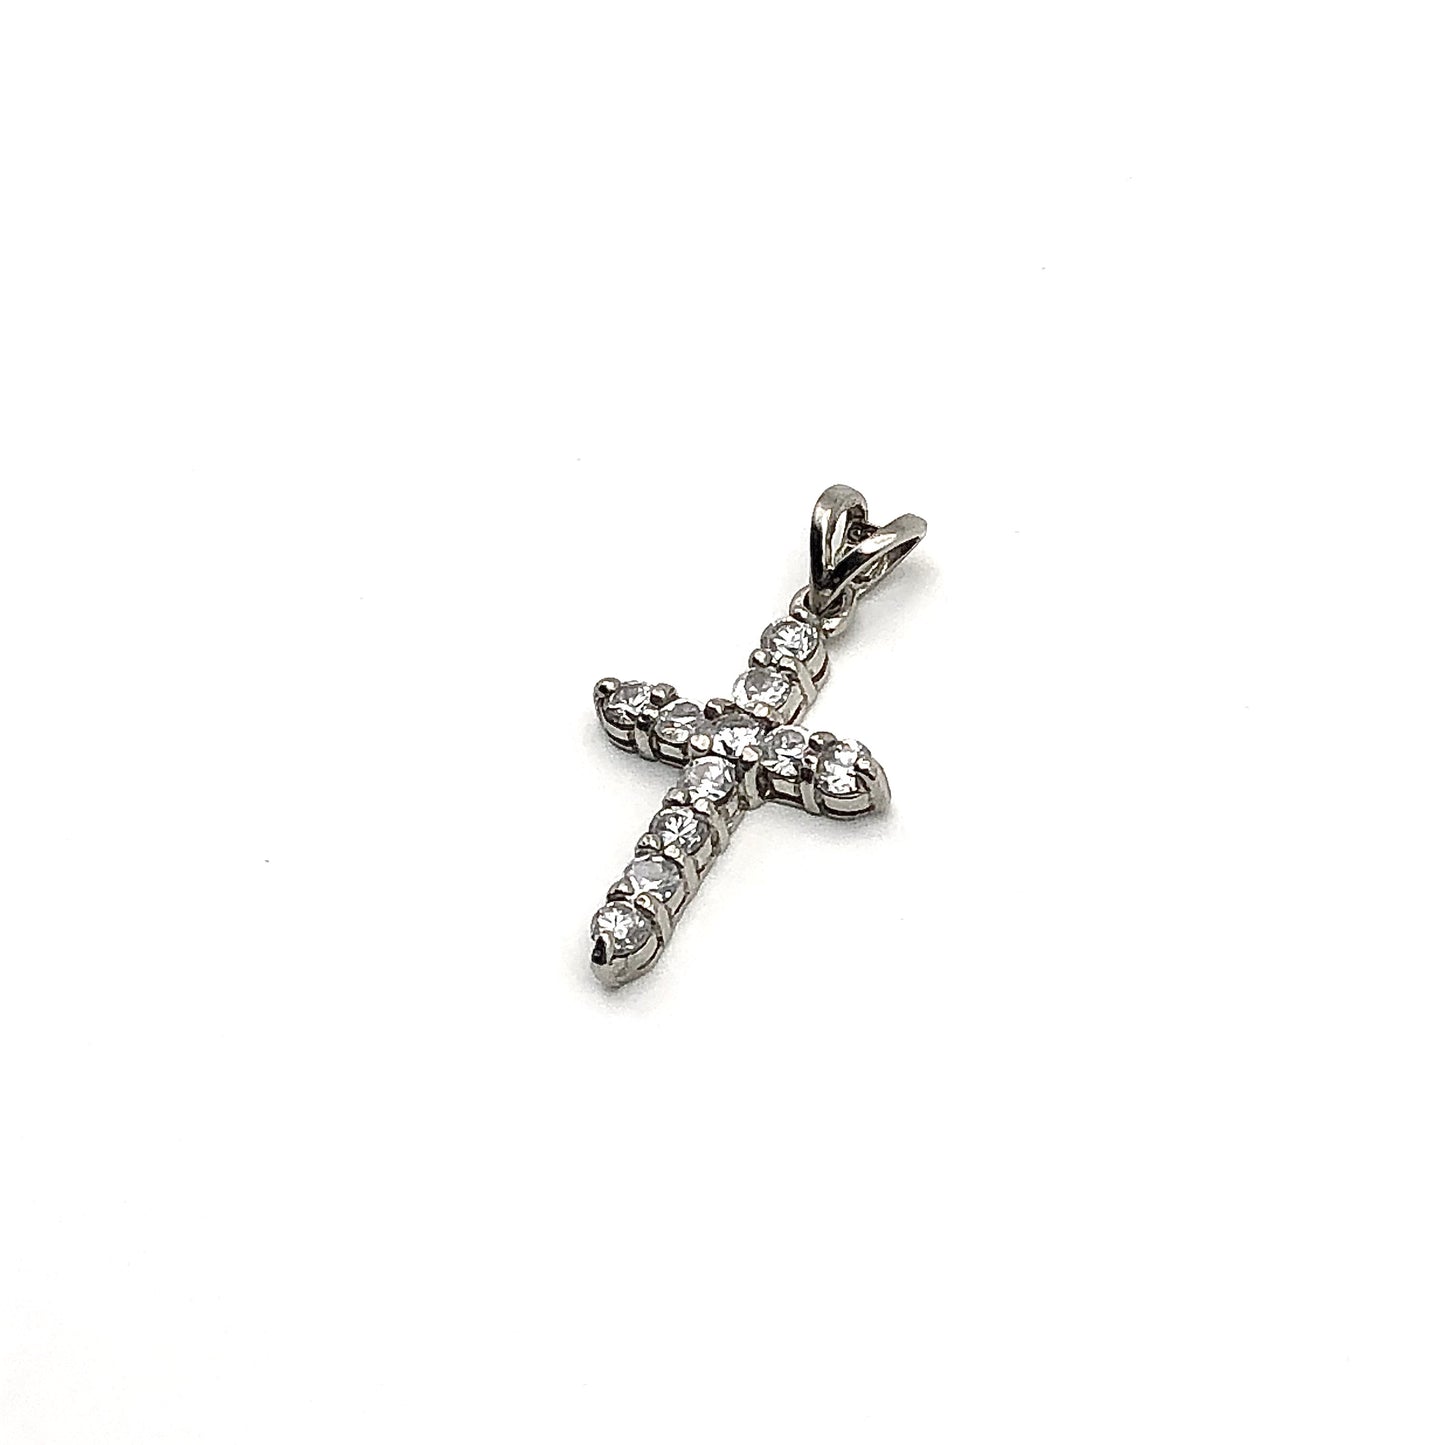 Cross Pendant Silver, Sparkling White Cubic Zirconia Stone Sterling Silver Cross Pendant - Estate Religious Jewelry